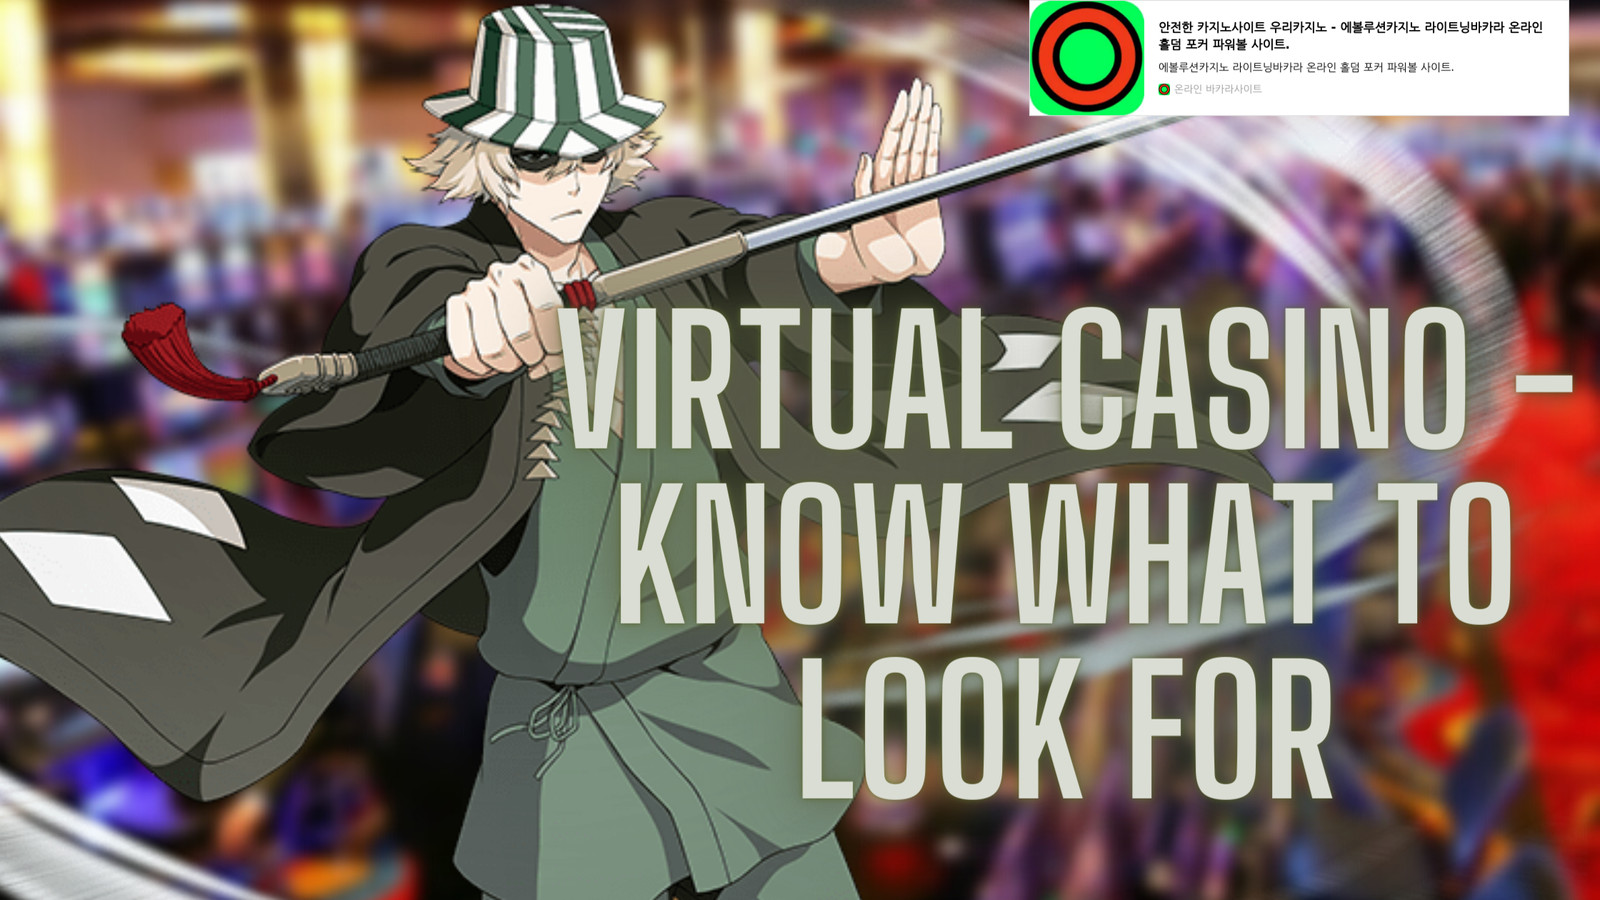 Virtual Casino - Know What to Look For